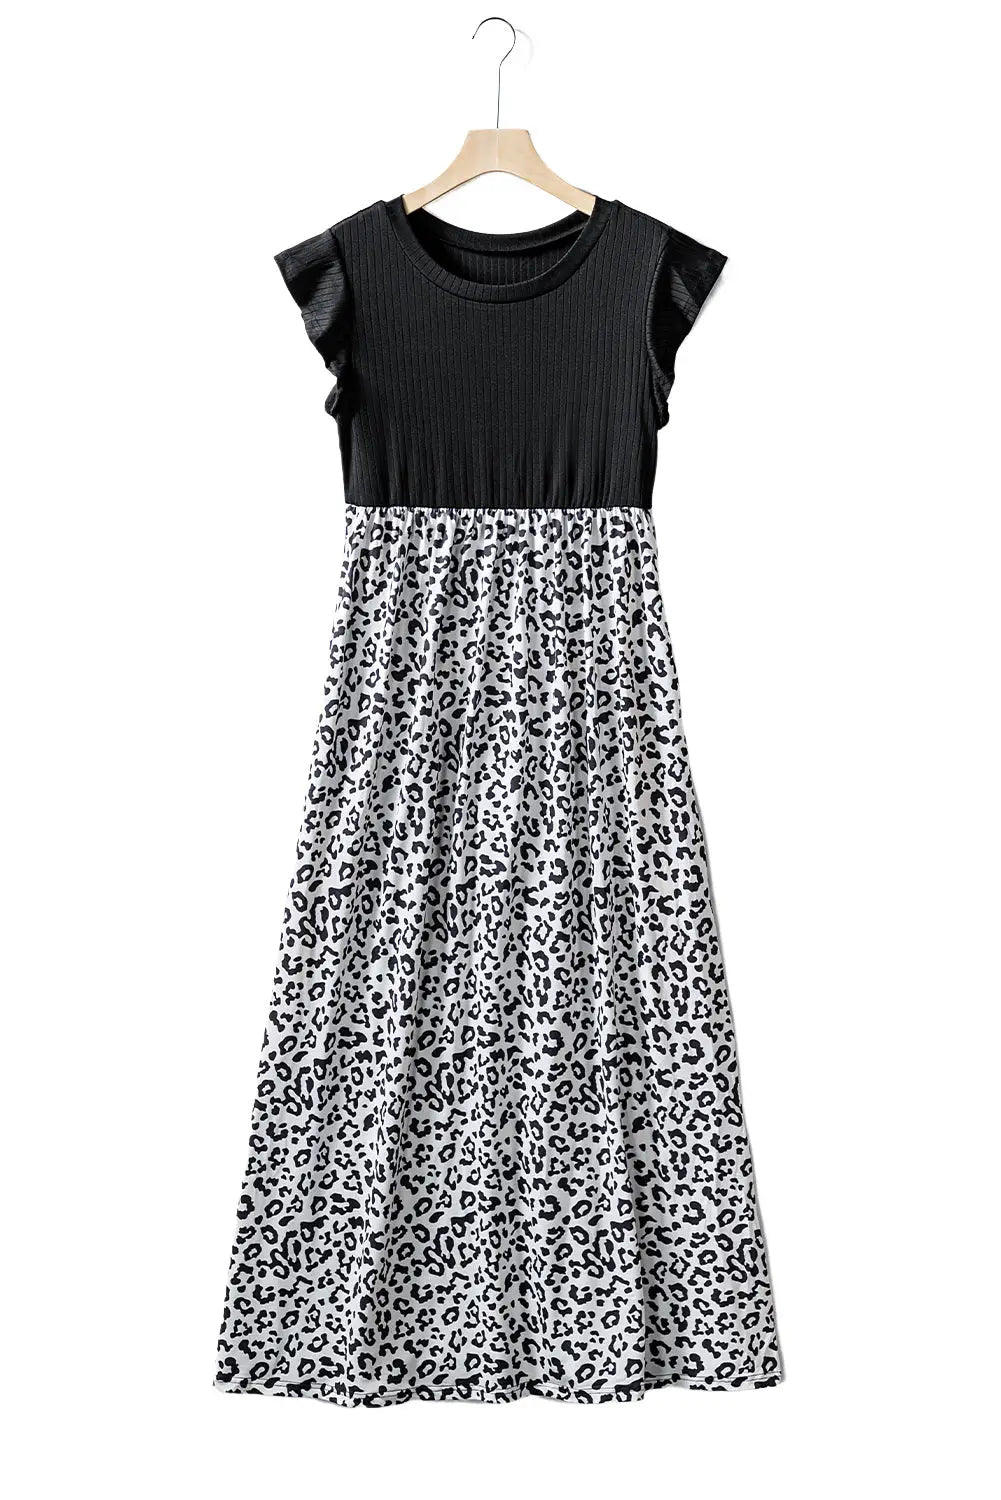 Black leopard patchwork ribbed maxi dress with pockets - dresses